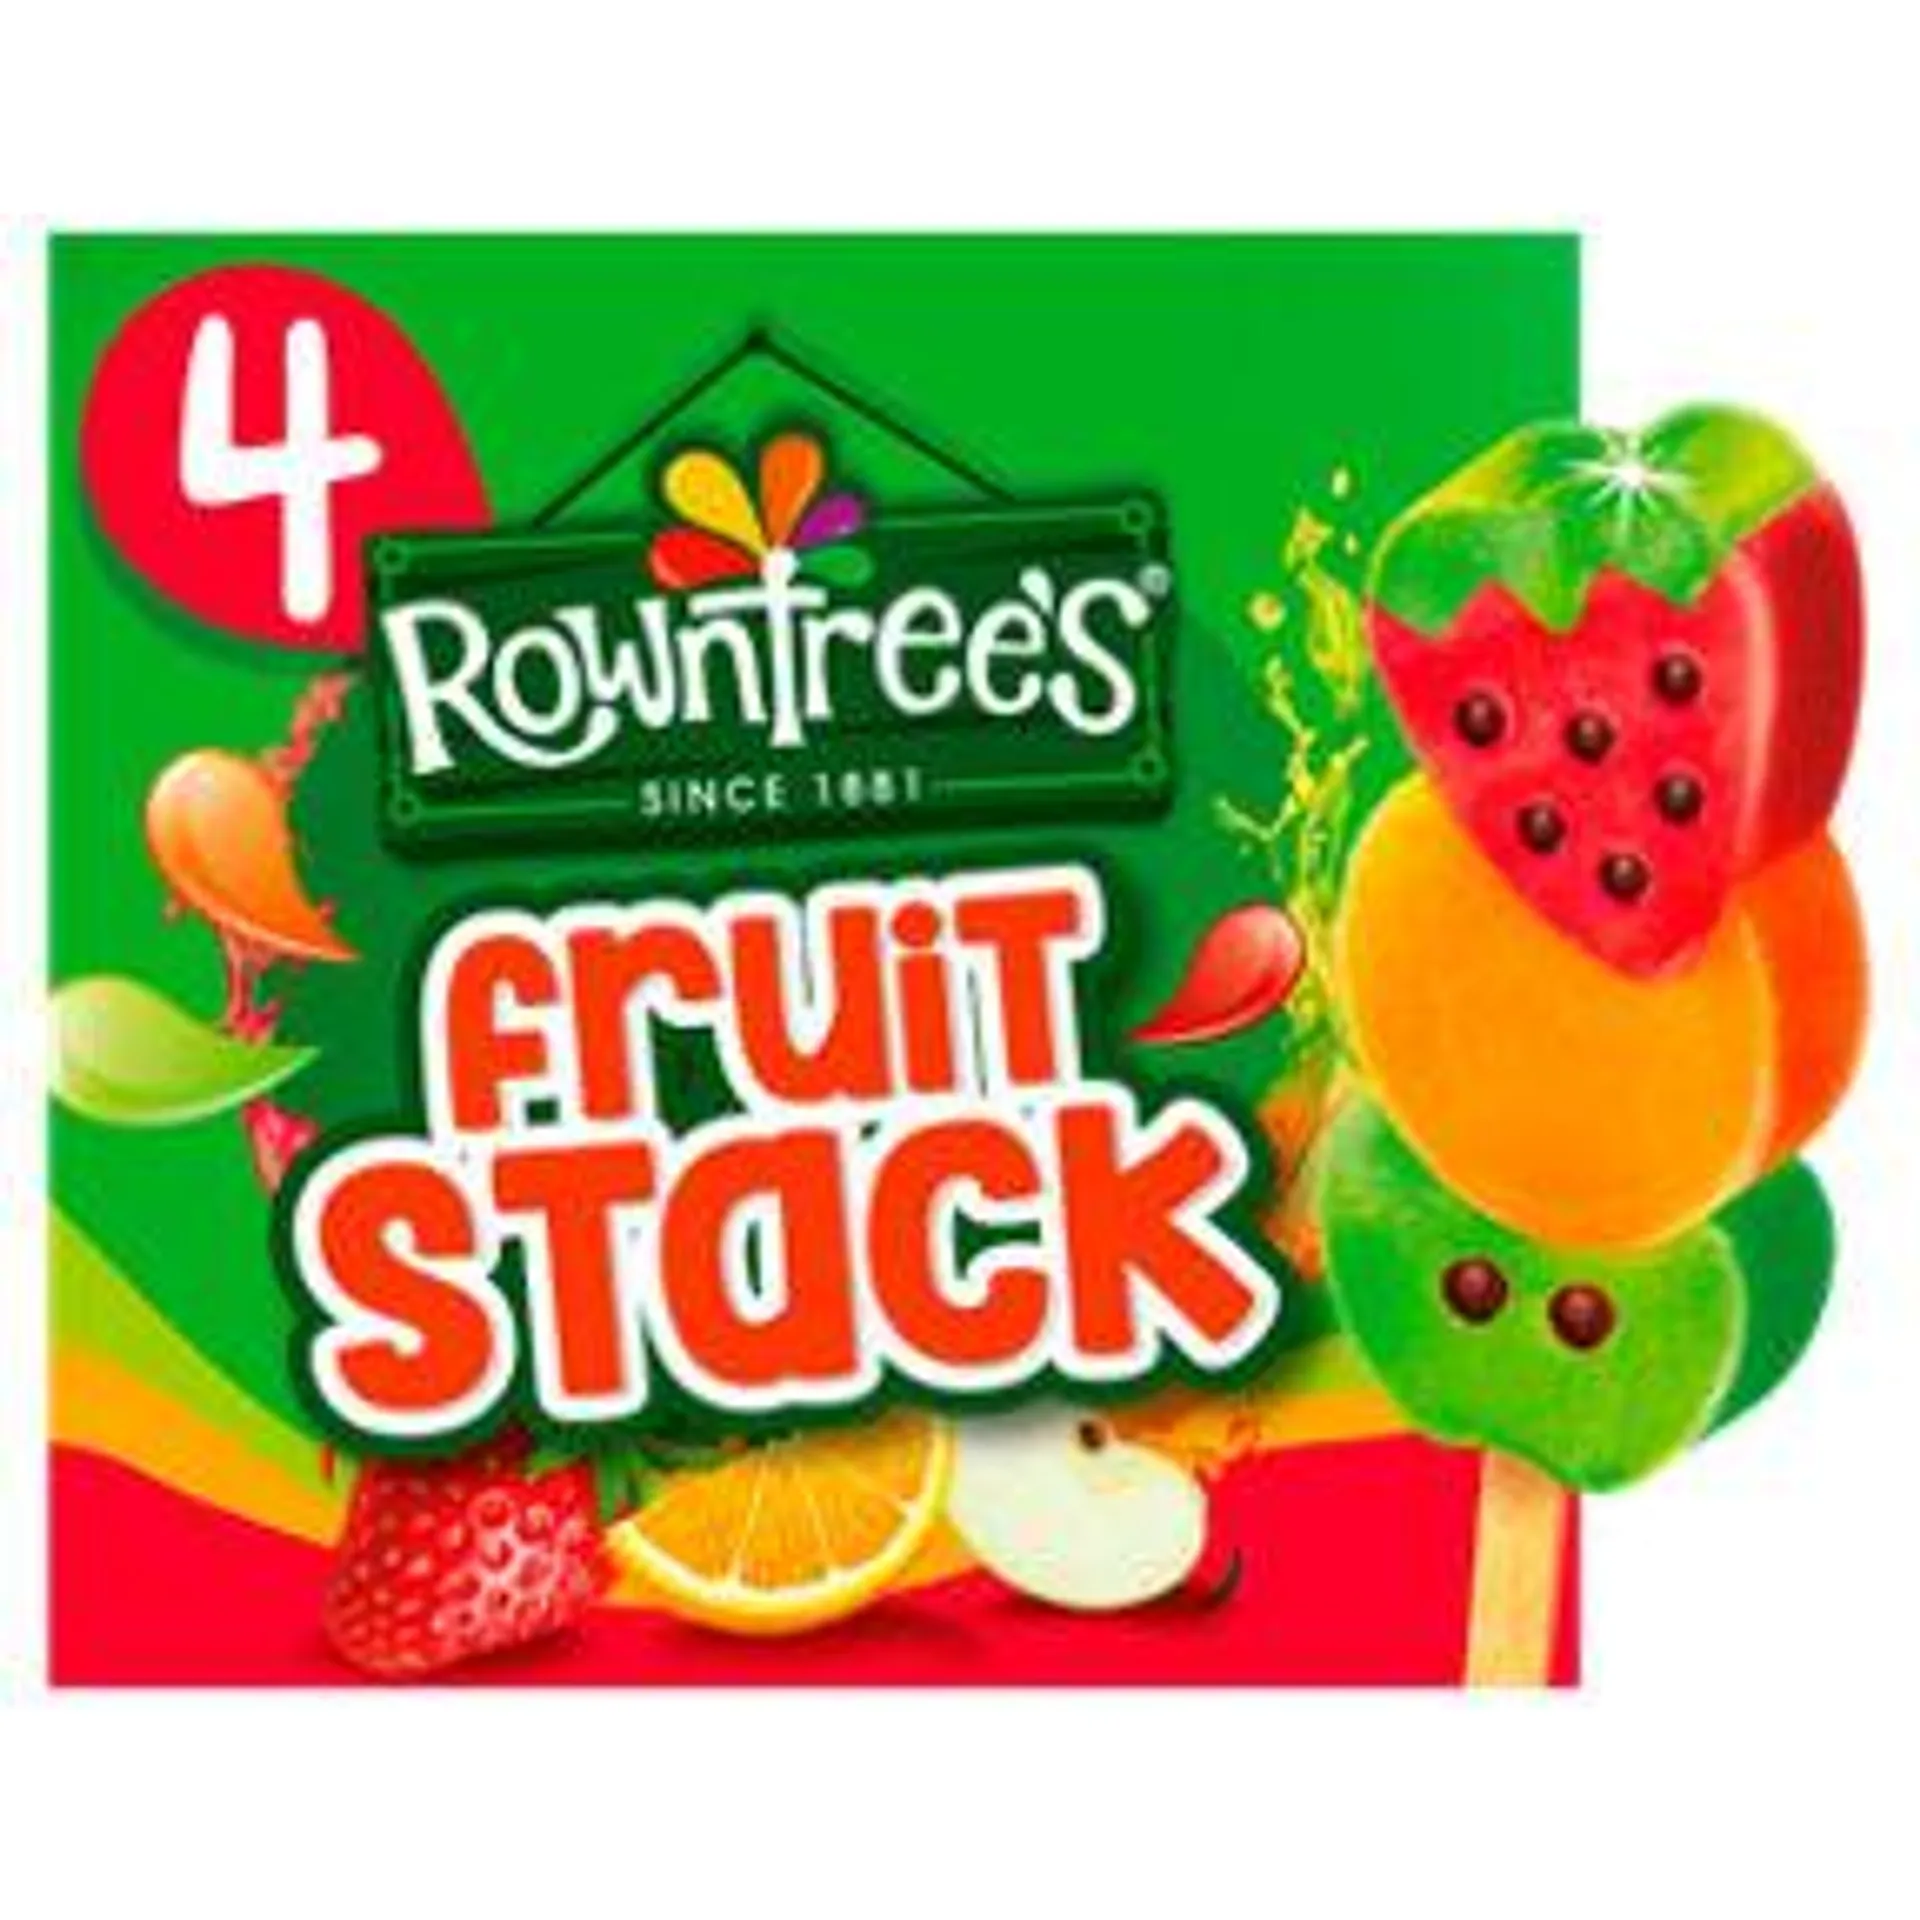 Rowntree's Fruit Stack Ice Lollies 4 Pack